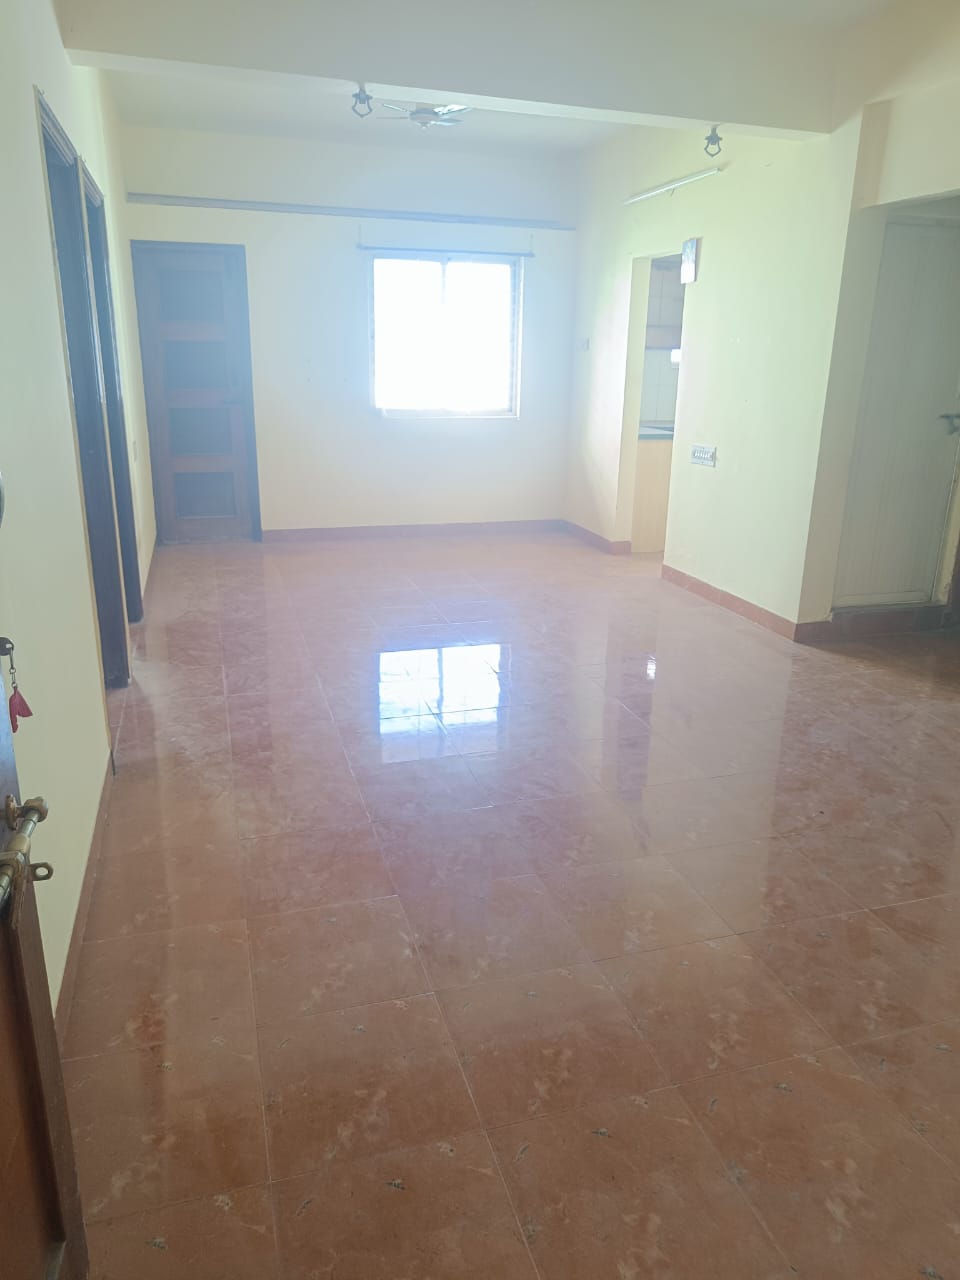 2 BHK Independent House for Lease Only at JAML2 - 2786 in Nelamangala